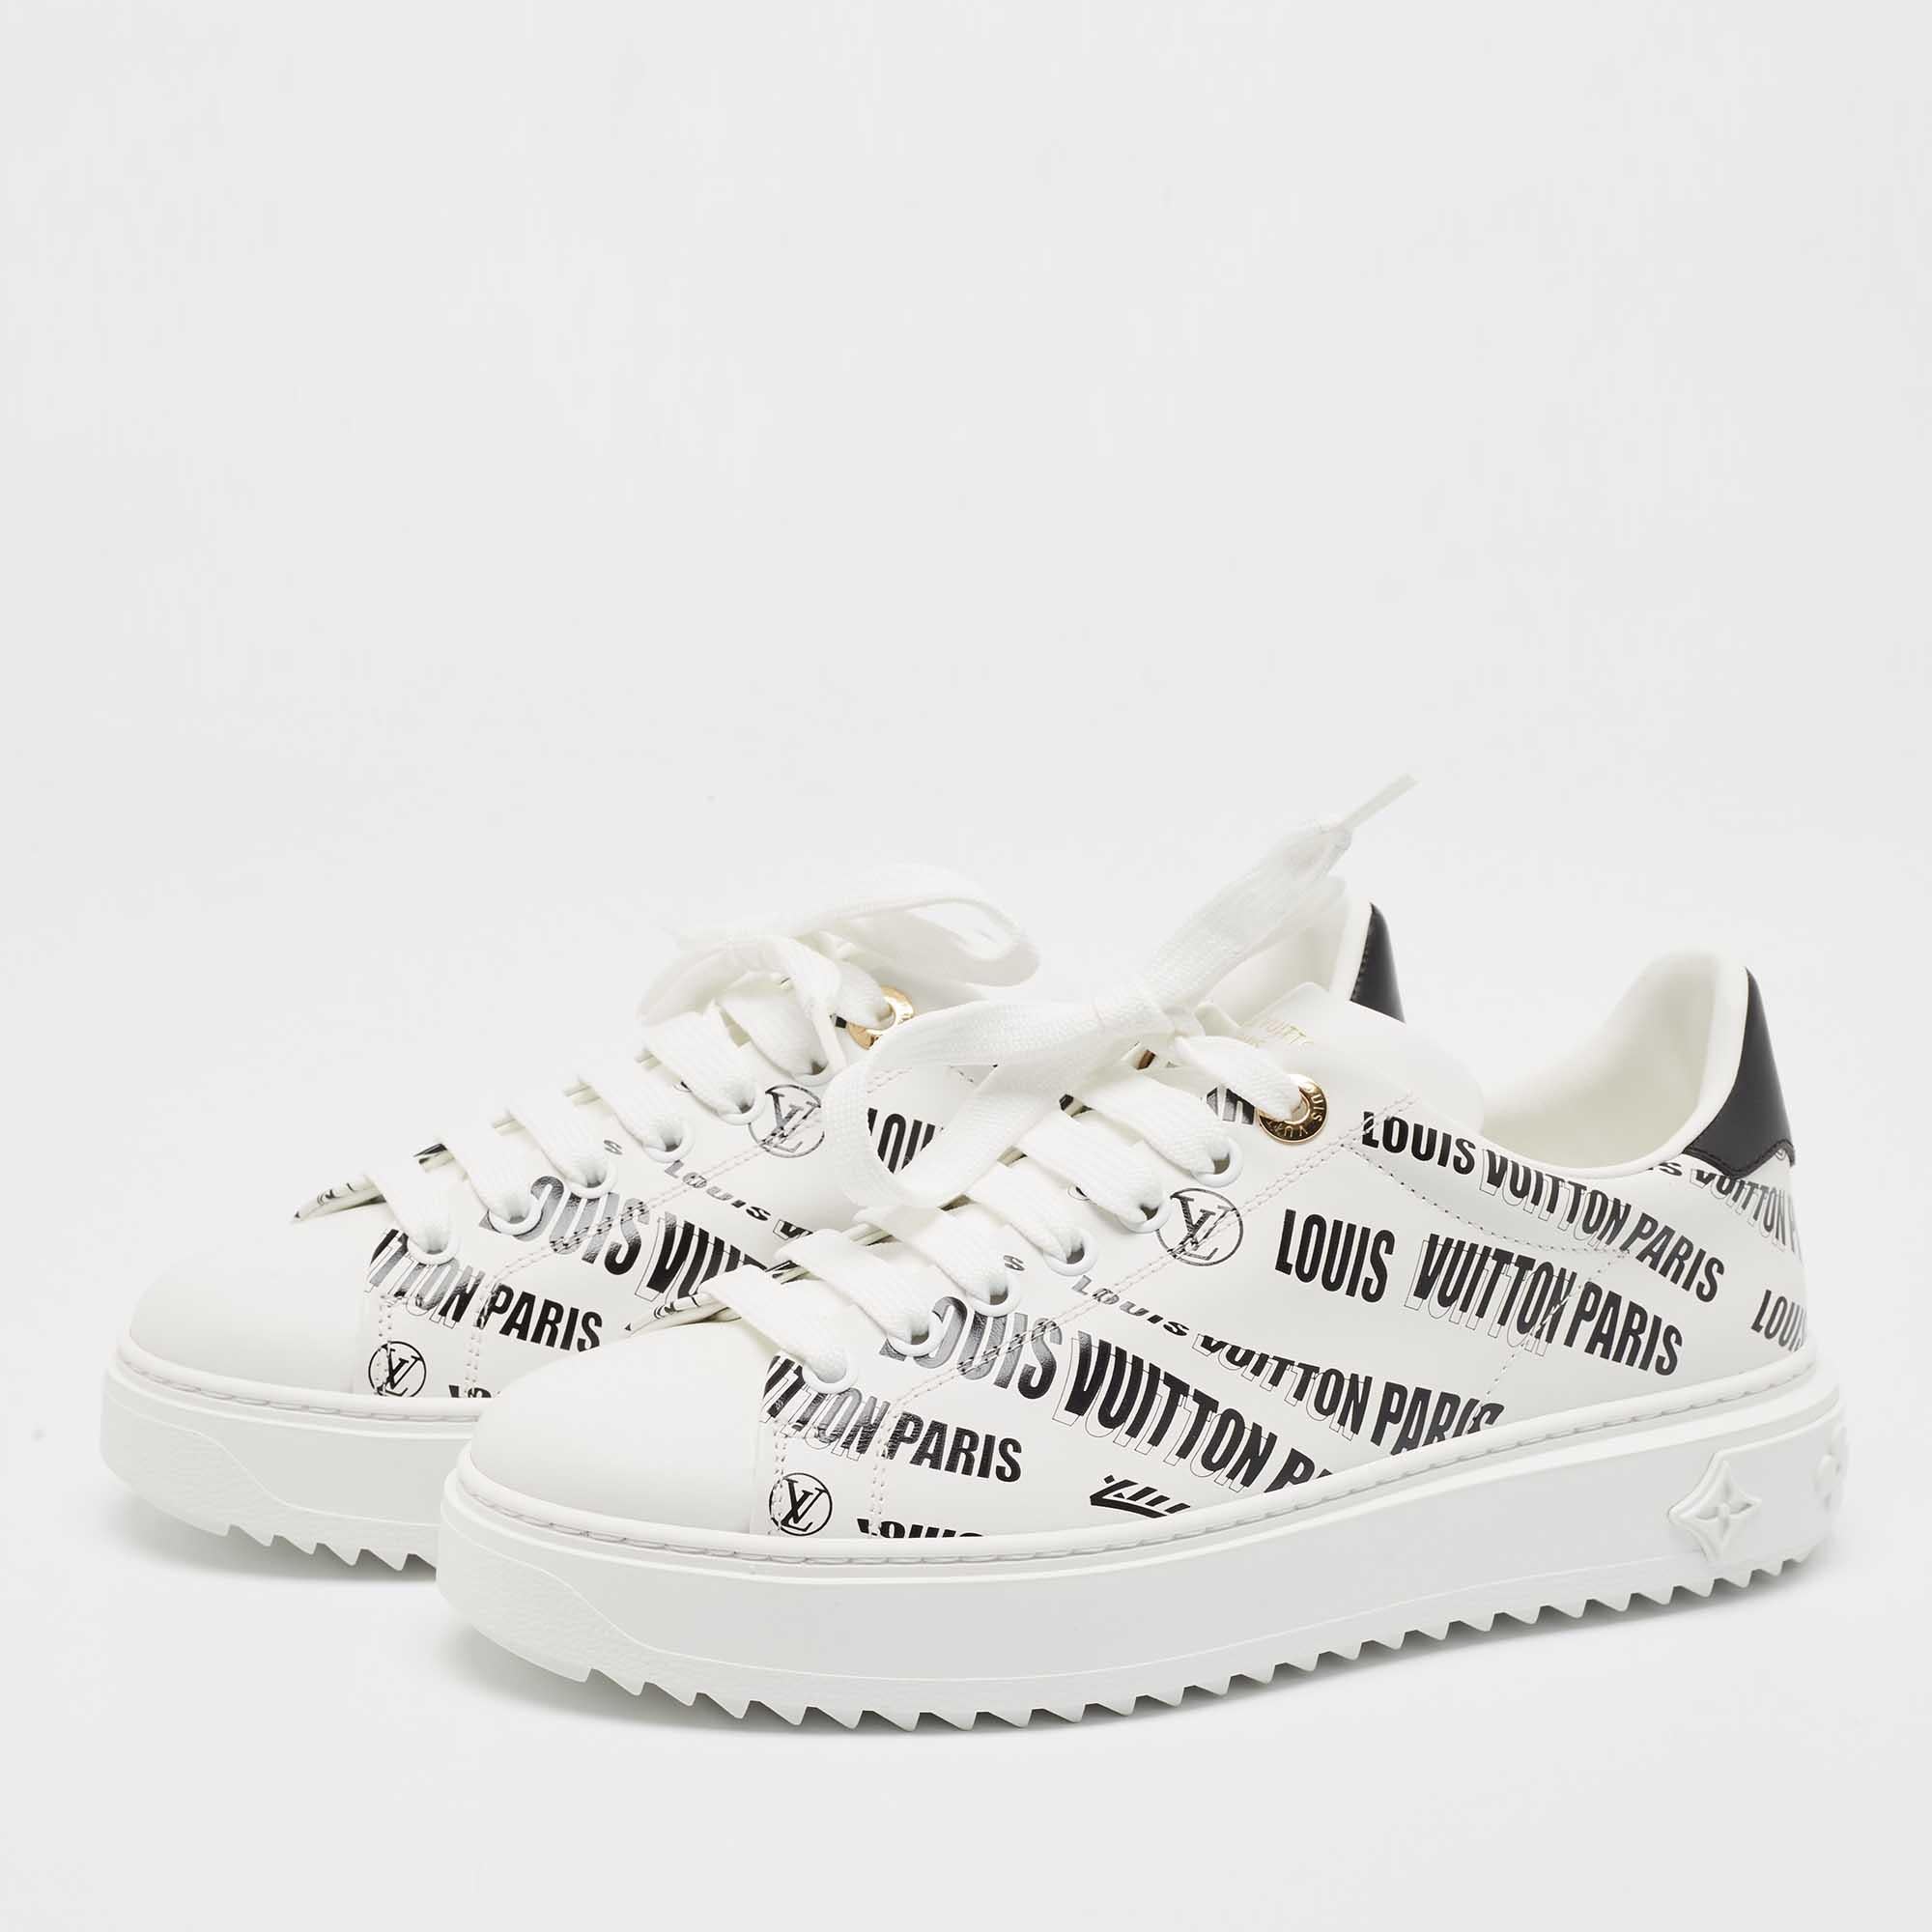 Louis Vuitton White/Black Leather Logo Printed Time Out Sneakers Size 37.5 For Sale 5